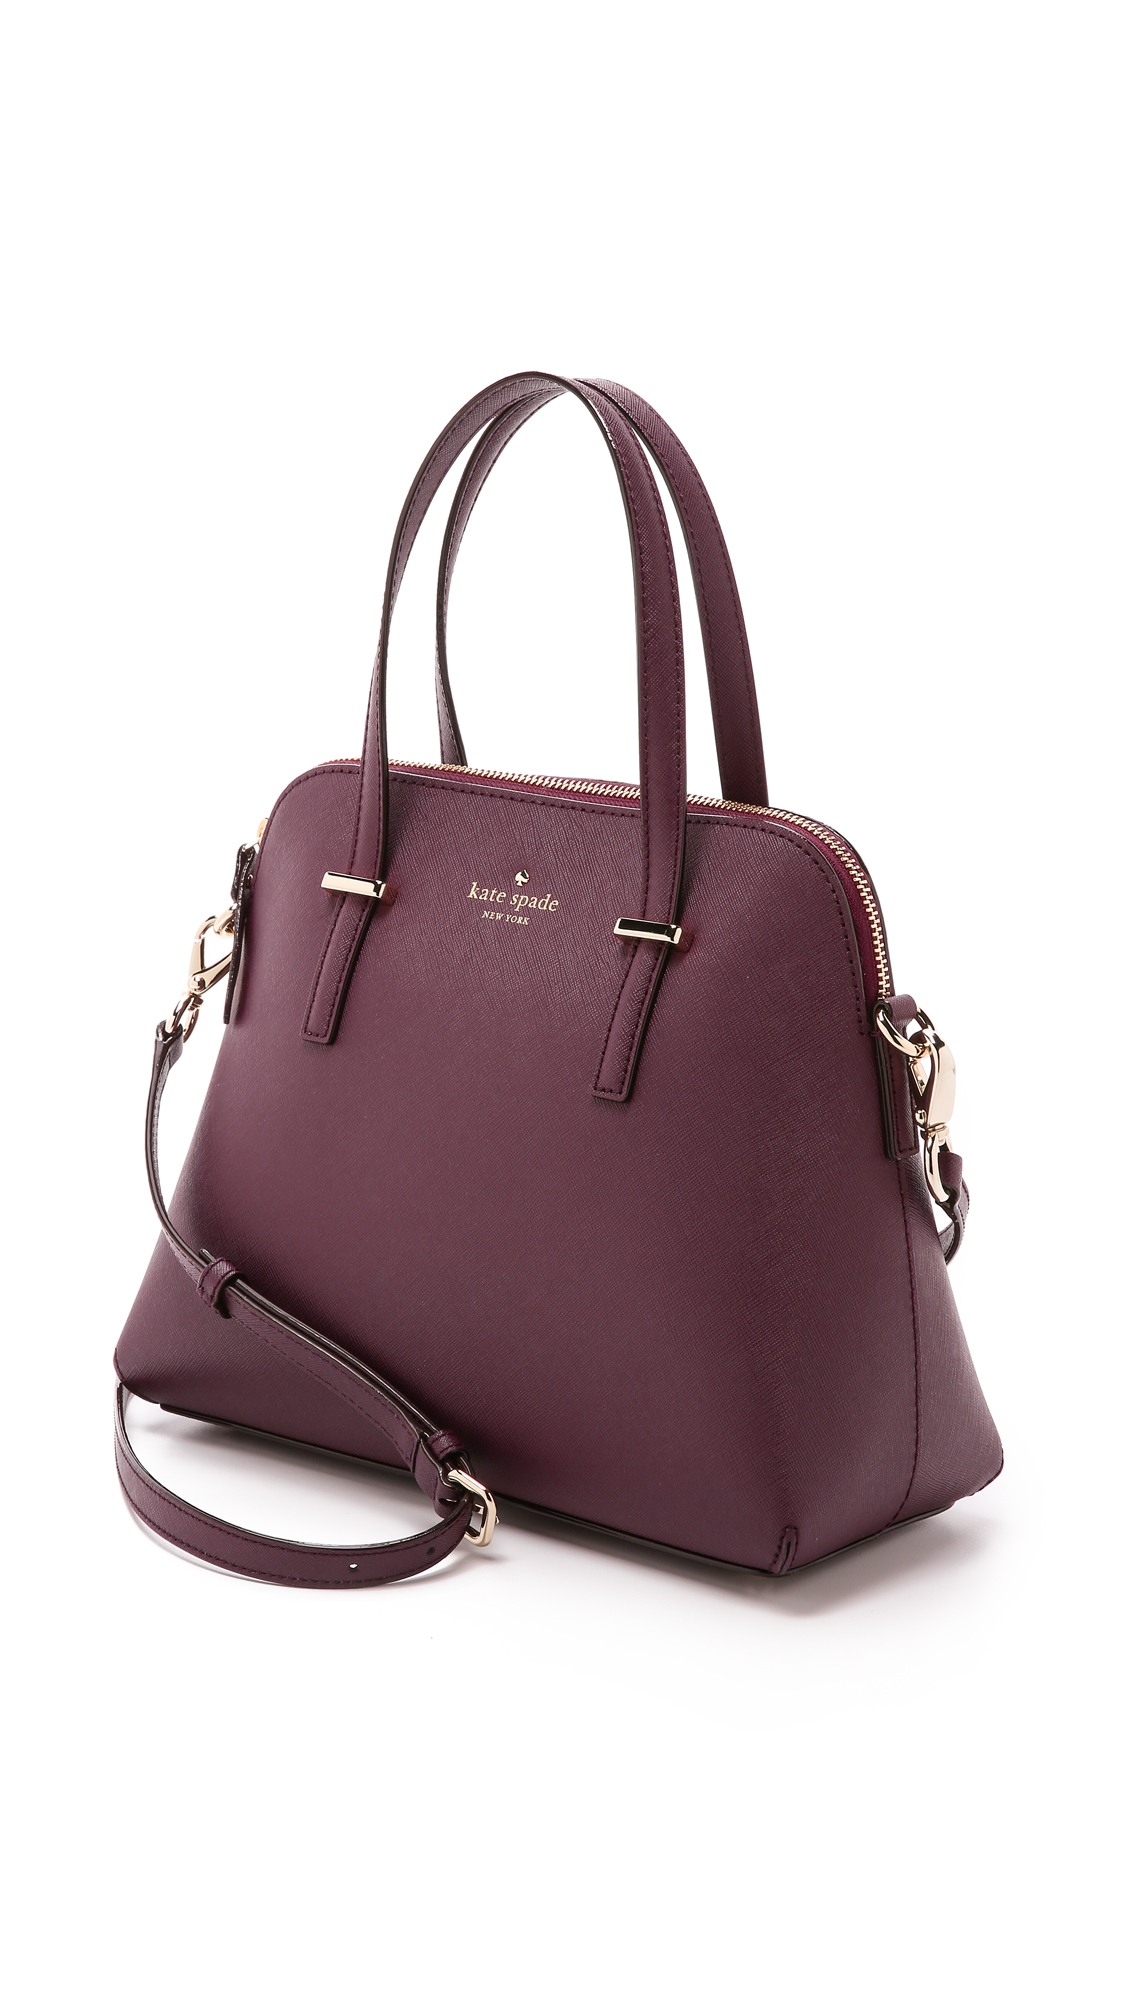 Lyst - Kate Spade New York Maise Cross Body Bag - Mulled Wine in Purple